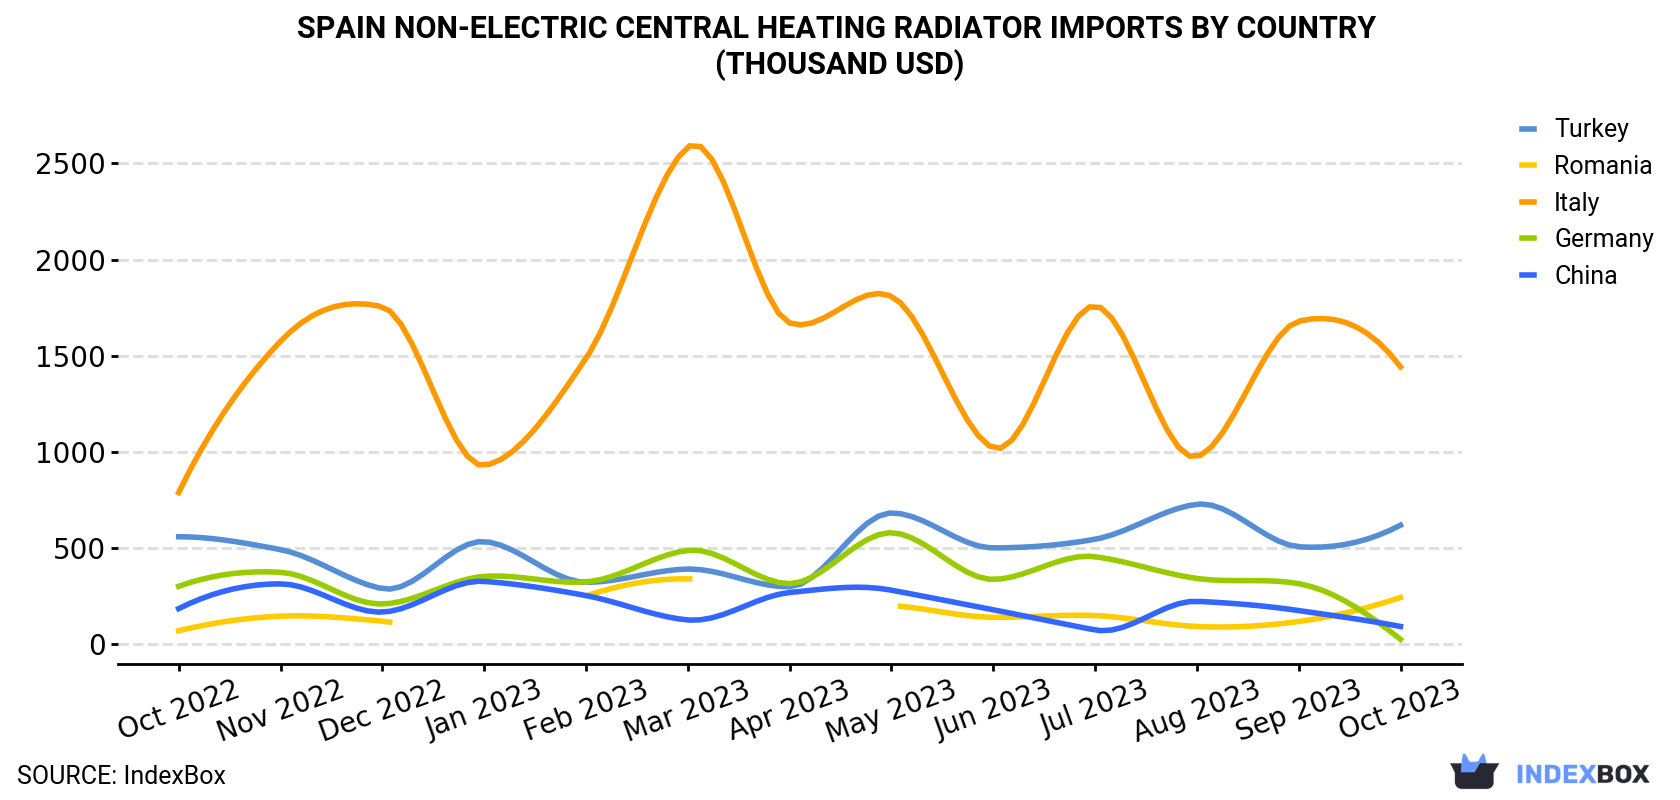 Spain Non-Electric Central Heating Radiator Imports By Country (Thousand USD)